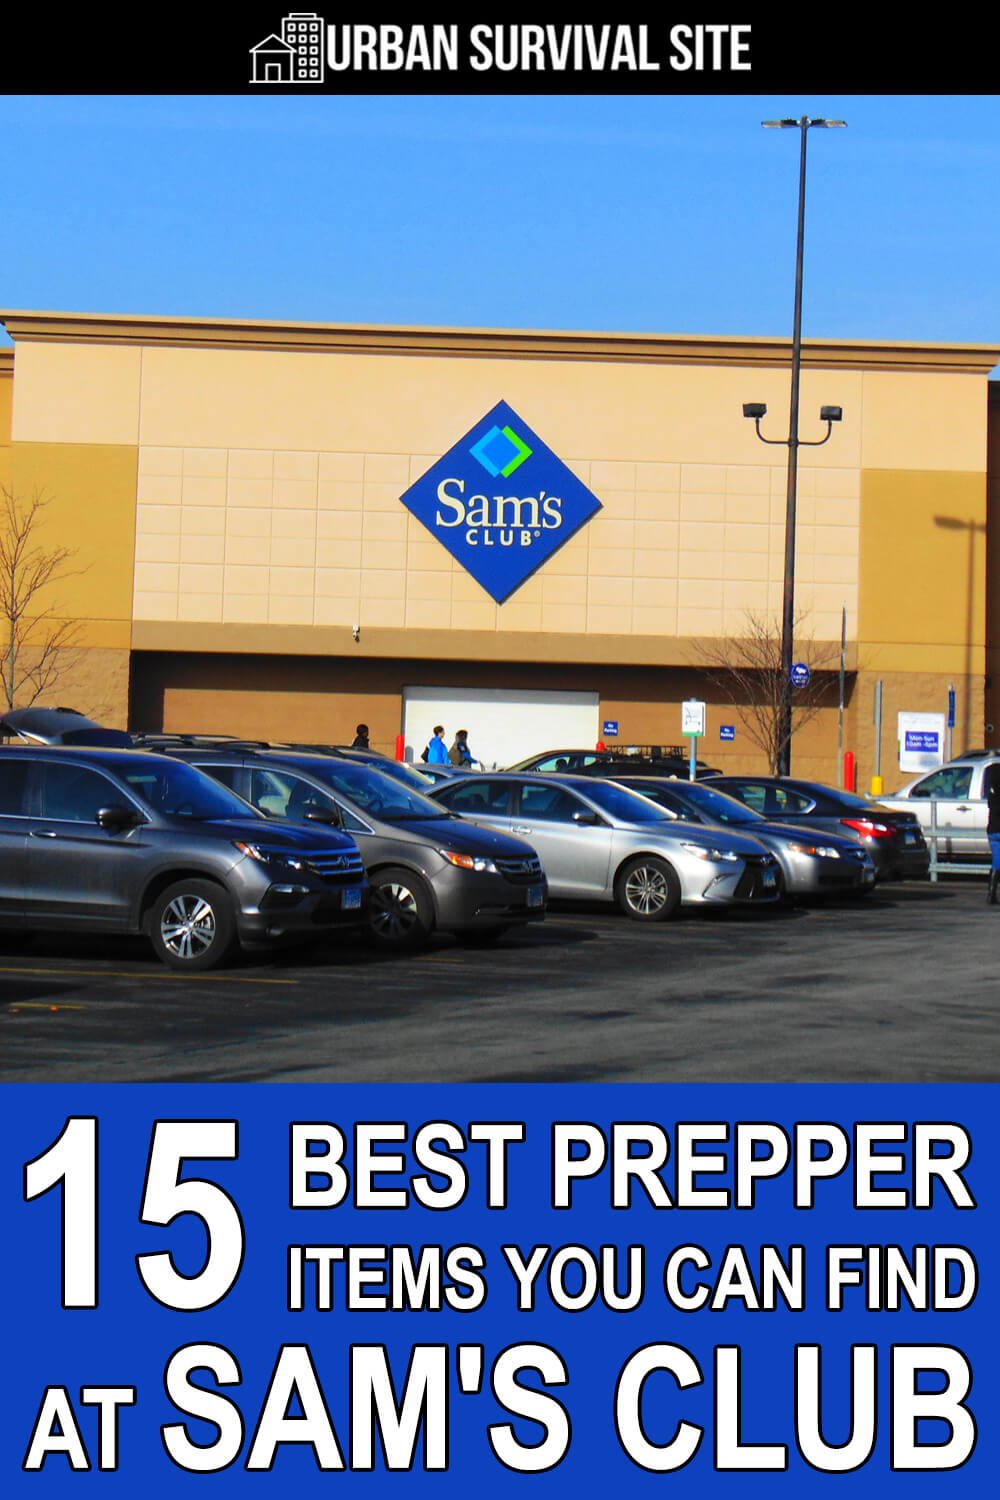 15 Best Prepper Items You Can Find at Sam's Club